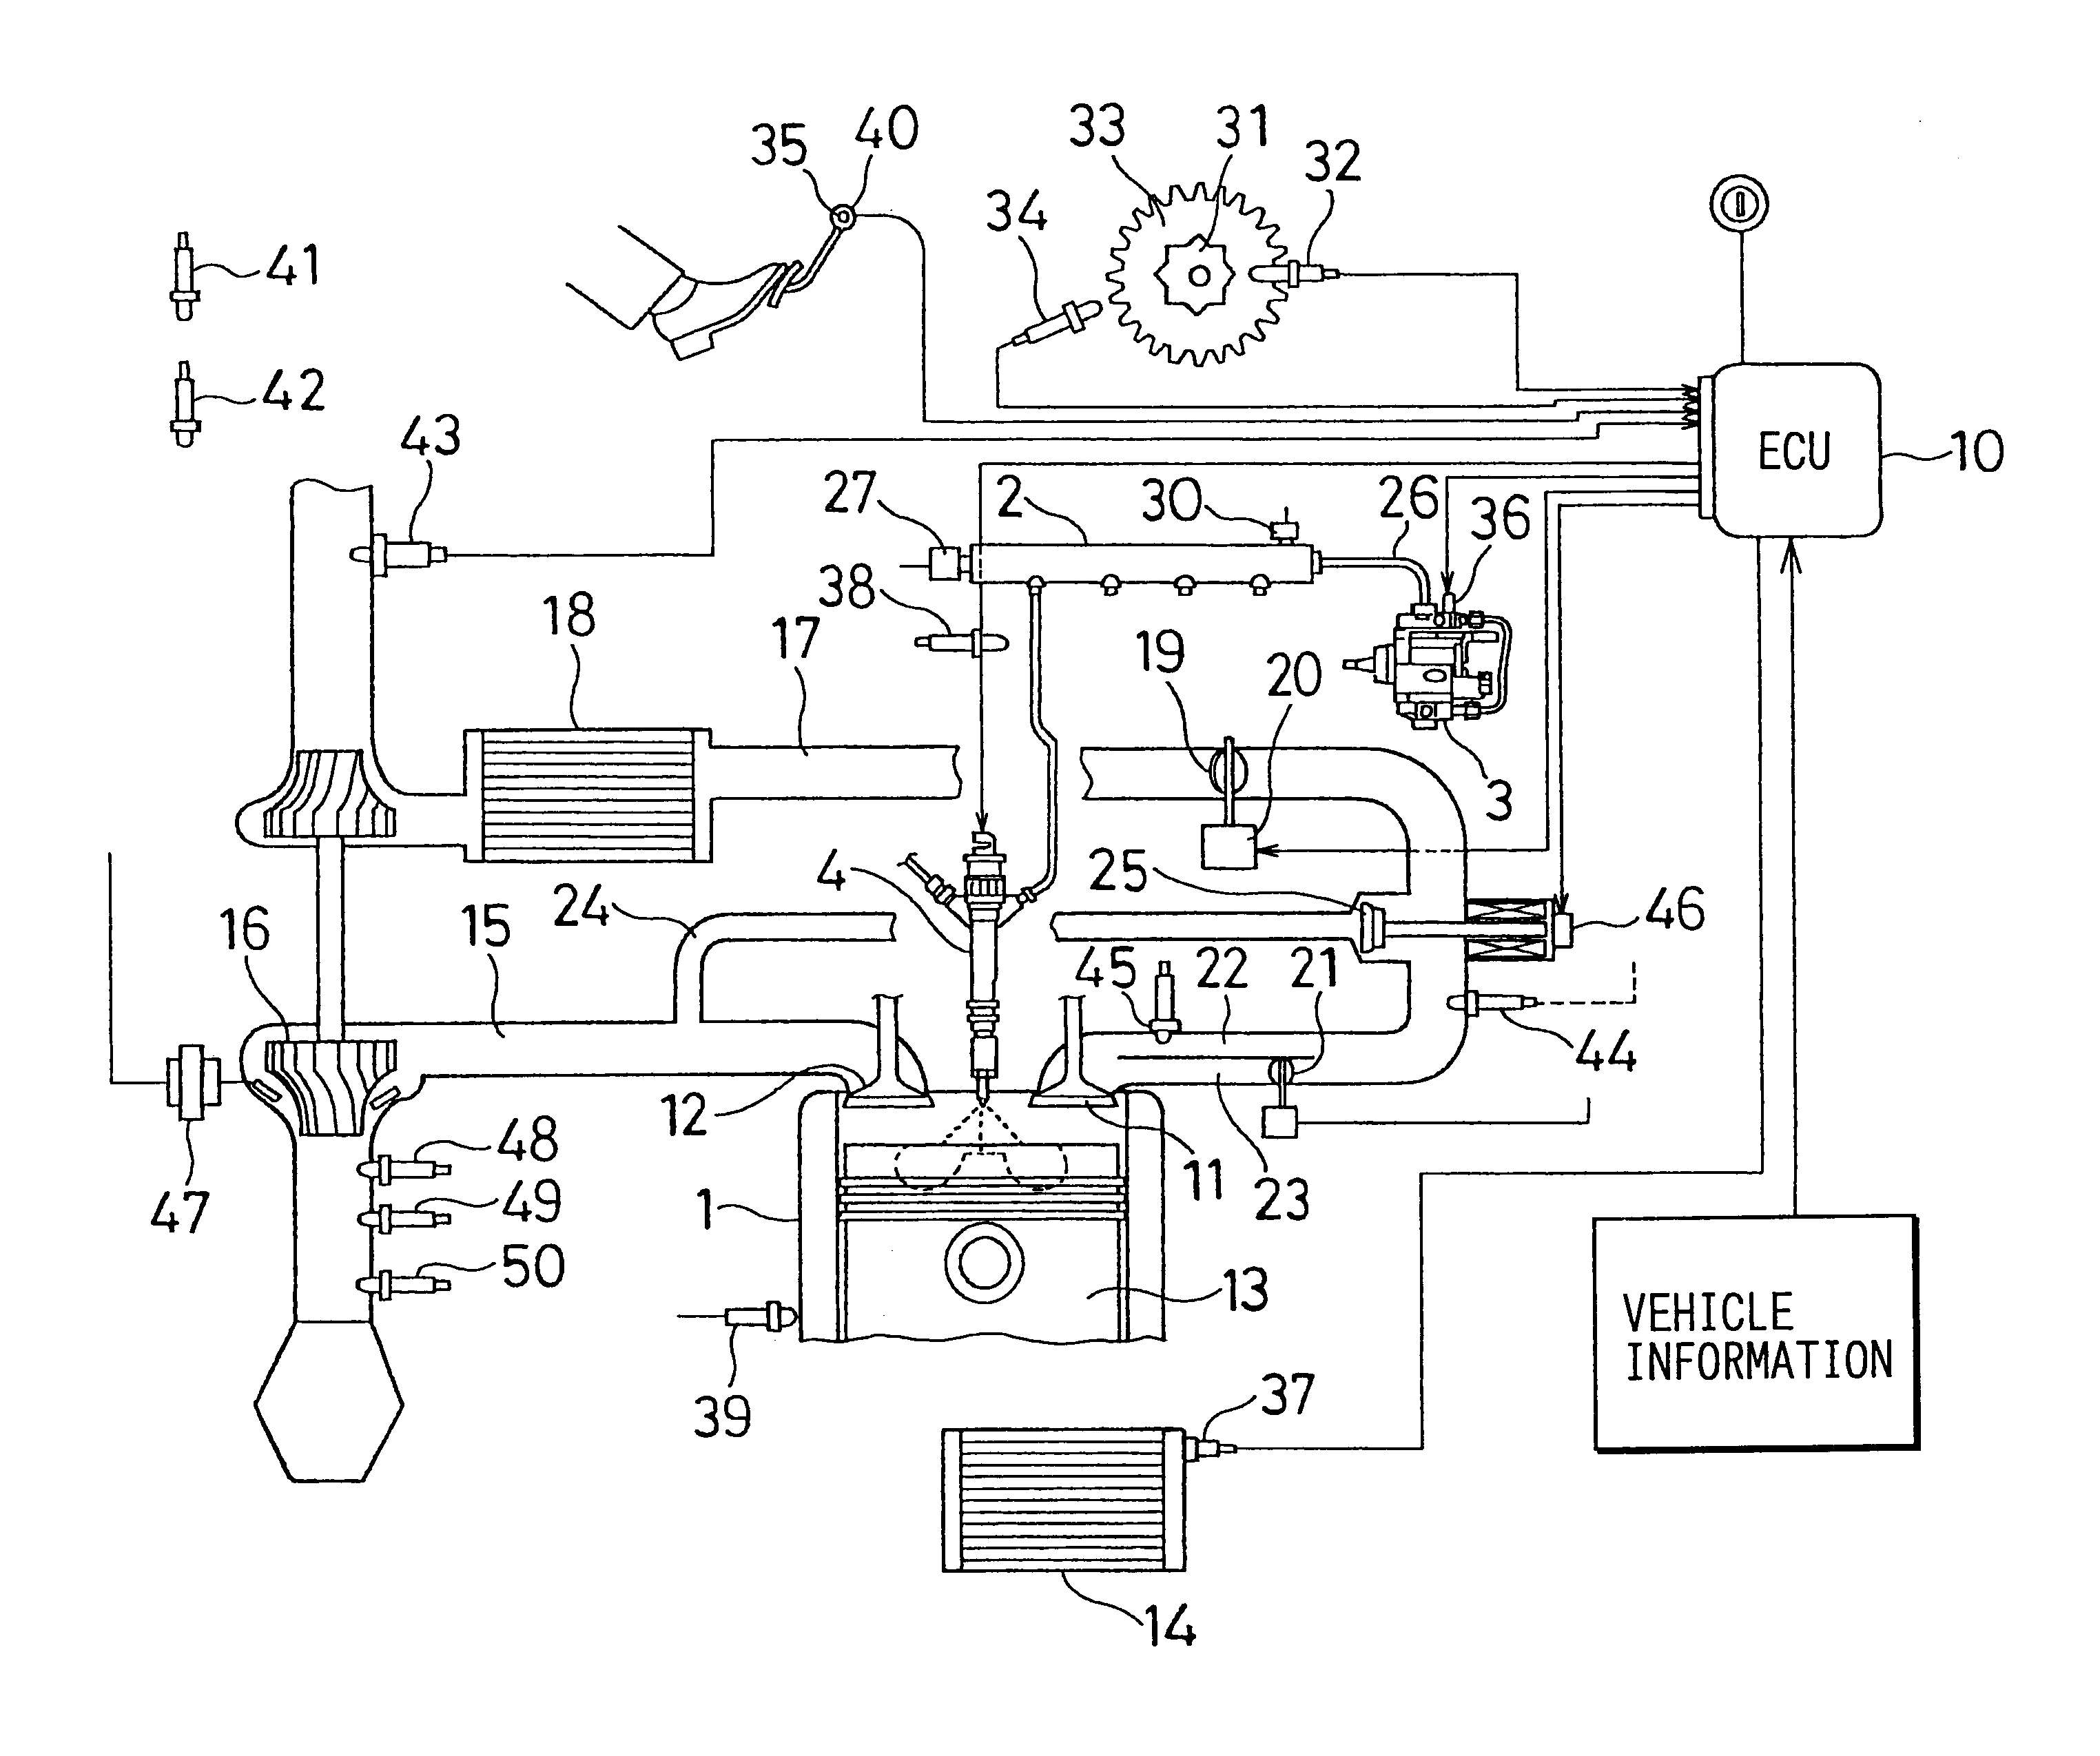 Fuel injection quantity control system for engine